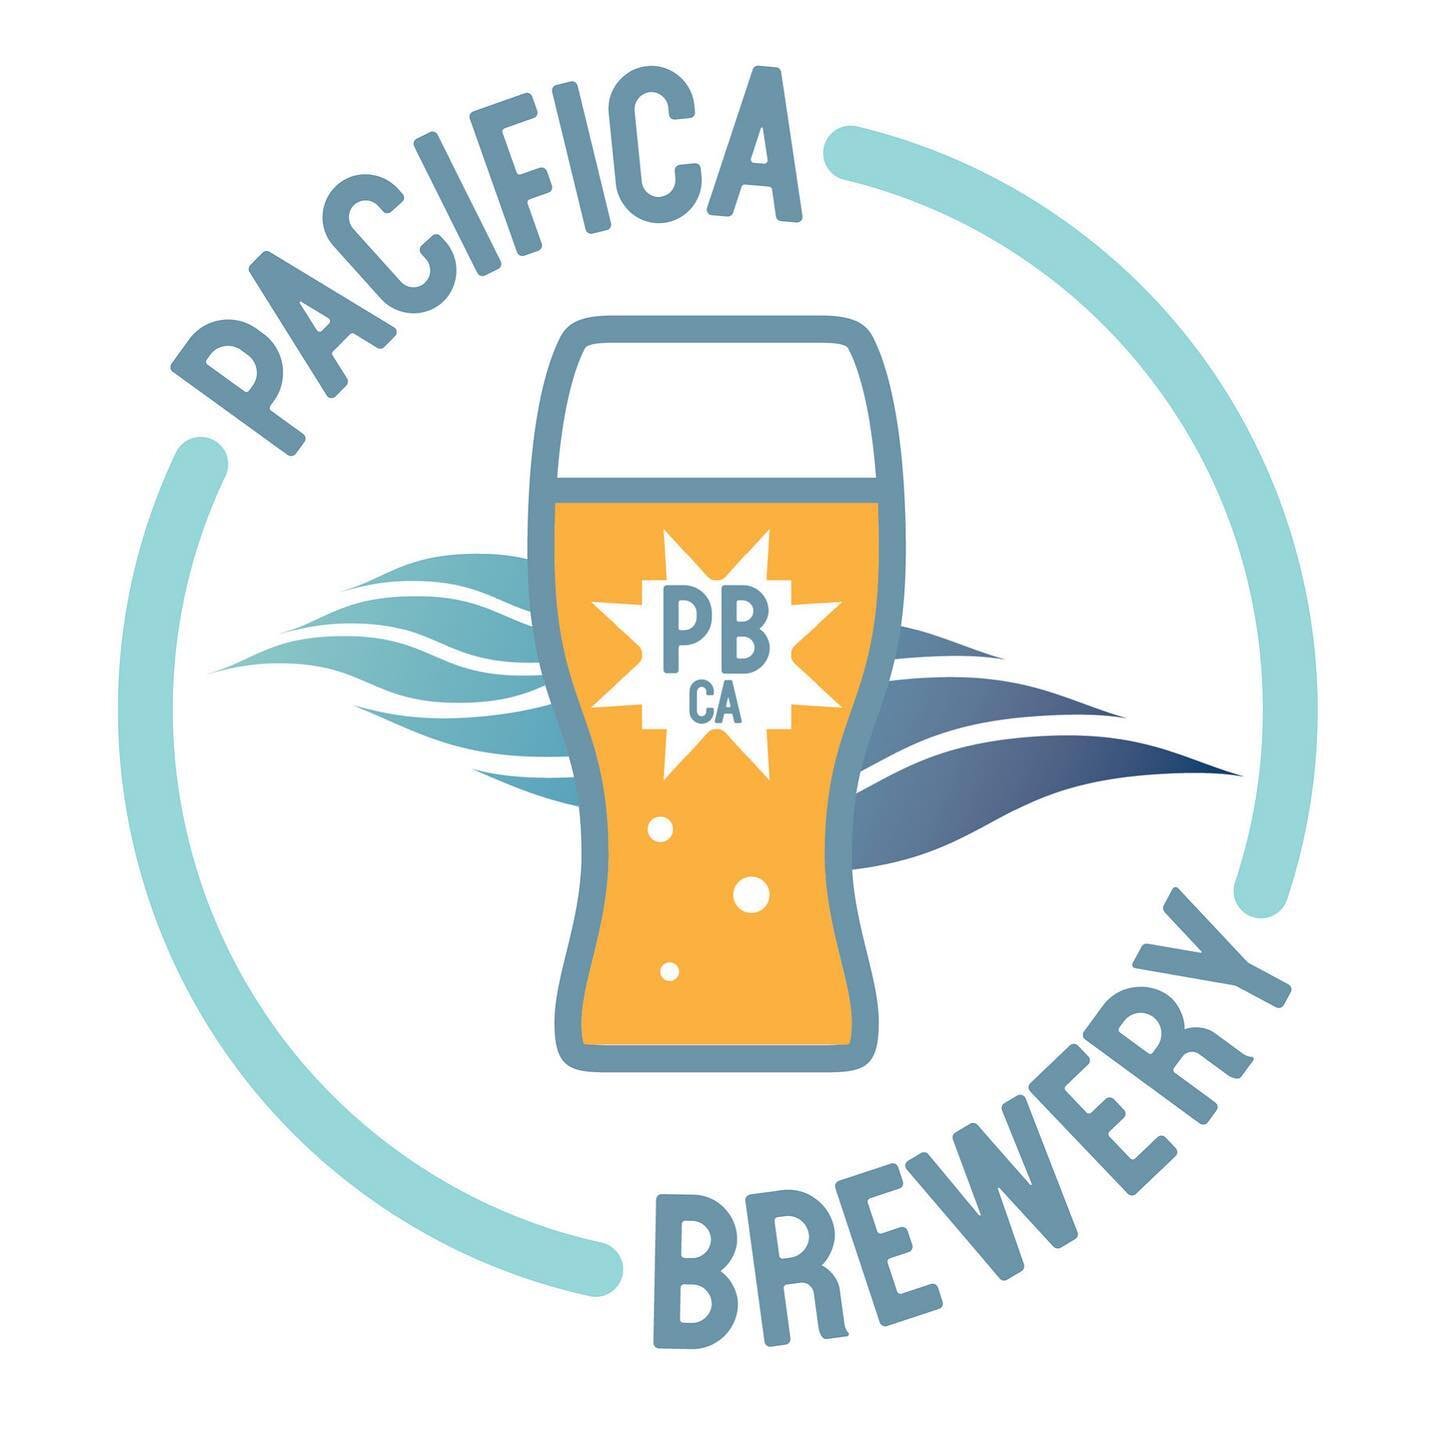 Welcome to the Family @pacificabrewery !! We&rsquo;re really excited to help represent these killer beers in our entire footprint! Scoopin up freshies as we speak - available for tomorrows deliveries and beyond. 🔥🔥💥💥🍻🍻🍻🙌